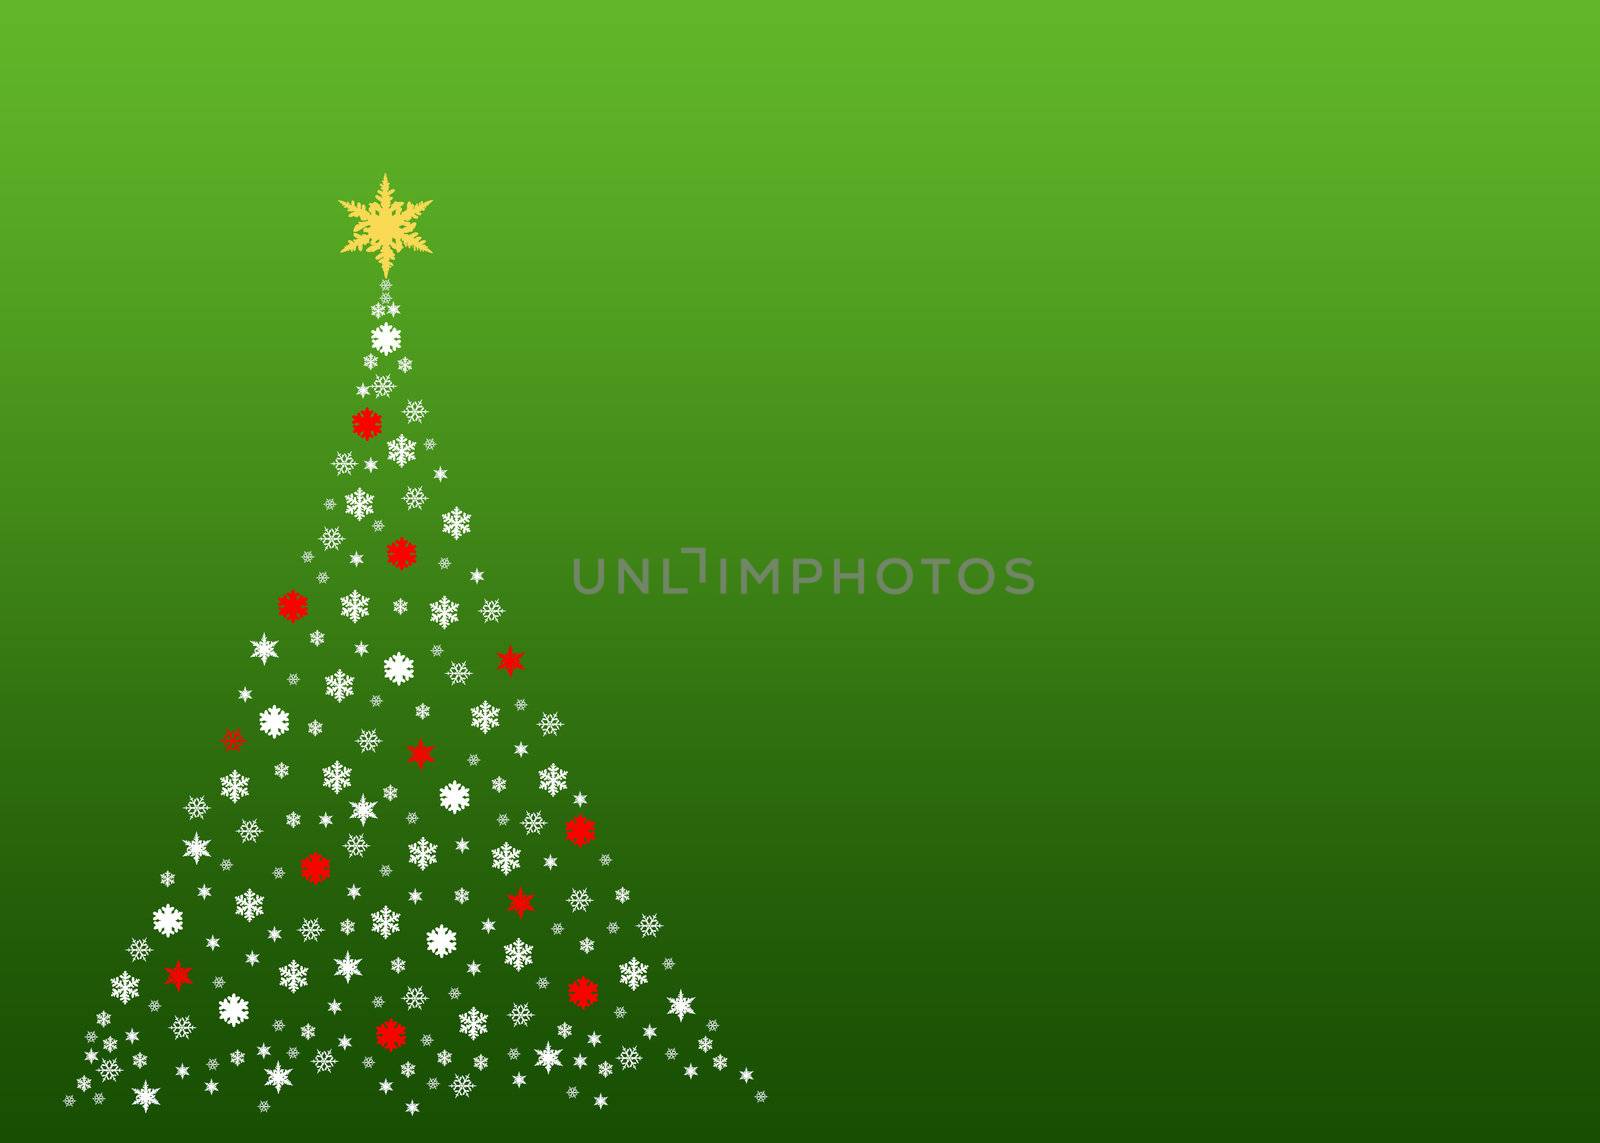 An illustration of a christmas tree formed by white  symbols made out of real snowflakes,On green gradient background, plenty of copy space and blank areas to put designs or text into.